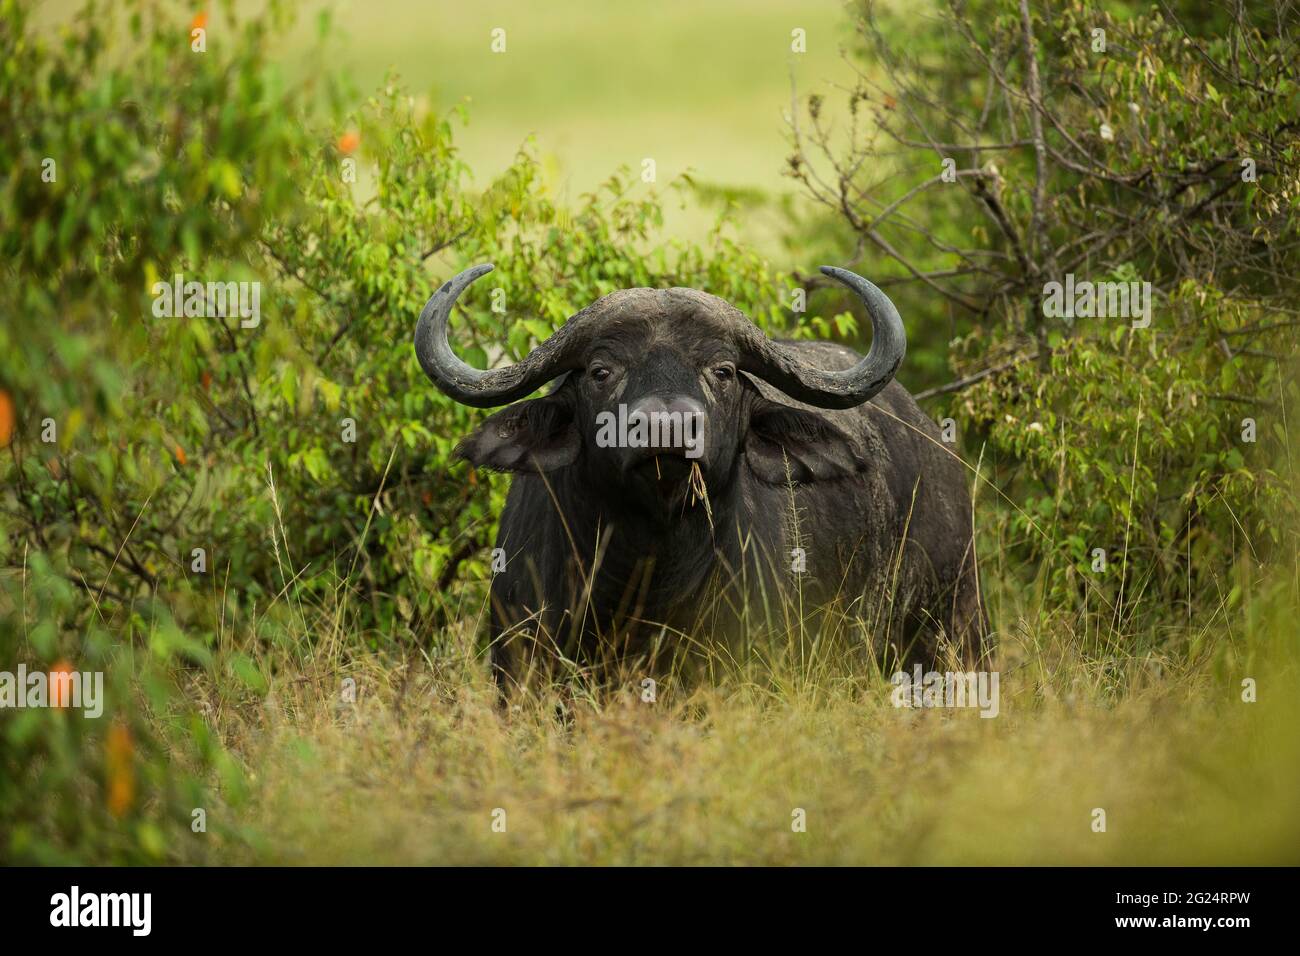 African cape buffalo, Maasai Mara, Kenya. Known as the most dangerous animal in Africa by hunters of old, the Cape Buffalo is a formidable animal. Stock Photo